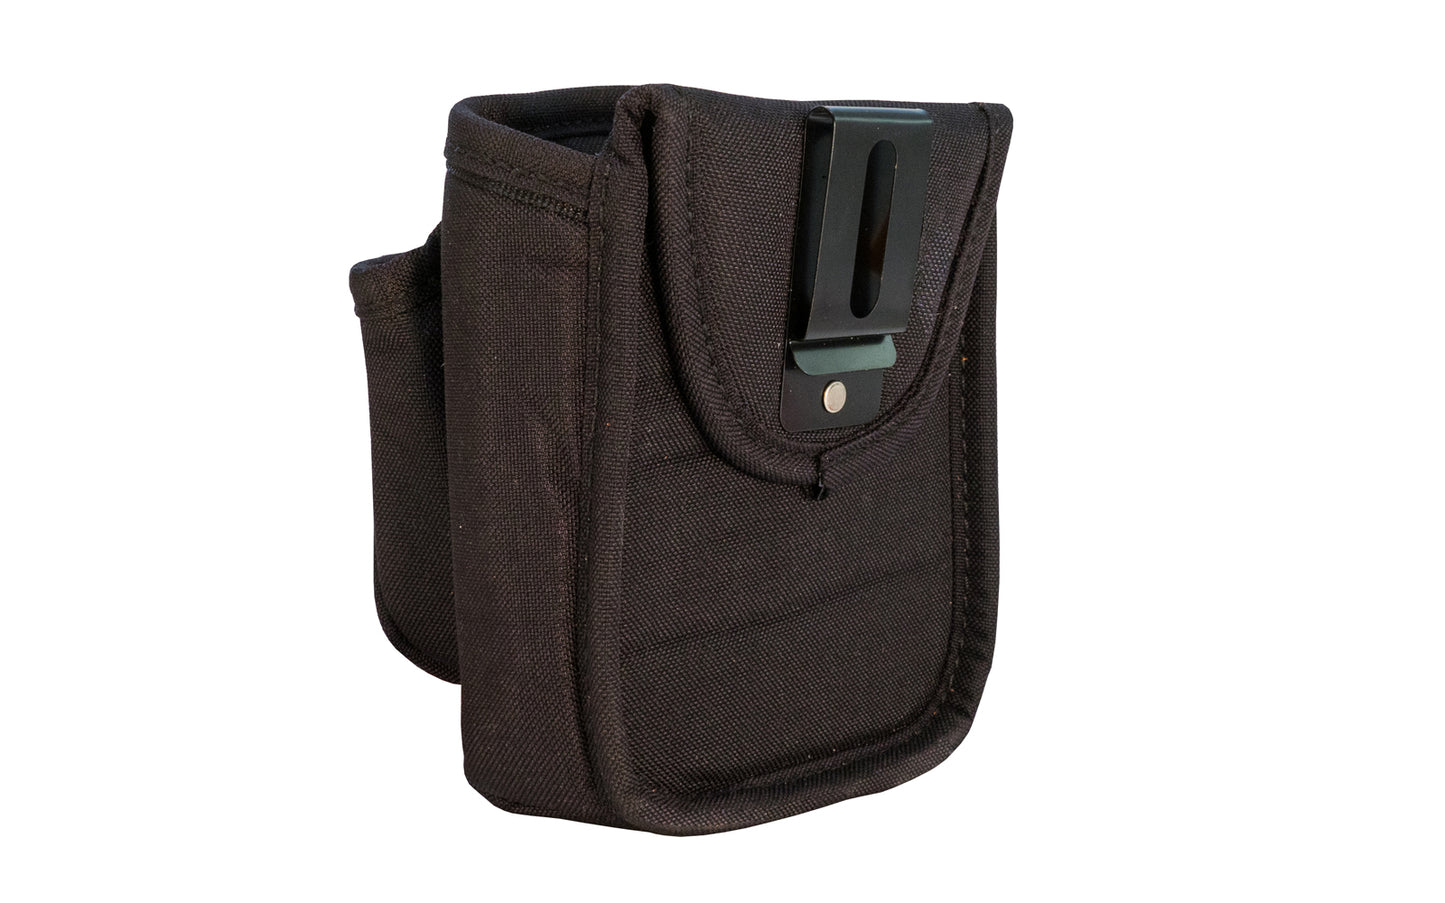 Occidental Leather Clip-On Double Pouch - Model 9502 ~ This bag by Occidental Leather is a cost efficient fastener & tool management clip-on pouch. 2-pouch bag. Perfect for small jobs or the do it yourself weekend projects. Made of Nylon material - 759244139808 - Great for small jobs or weekend projects.